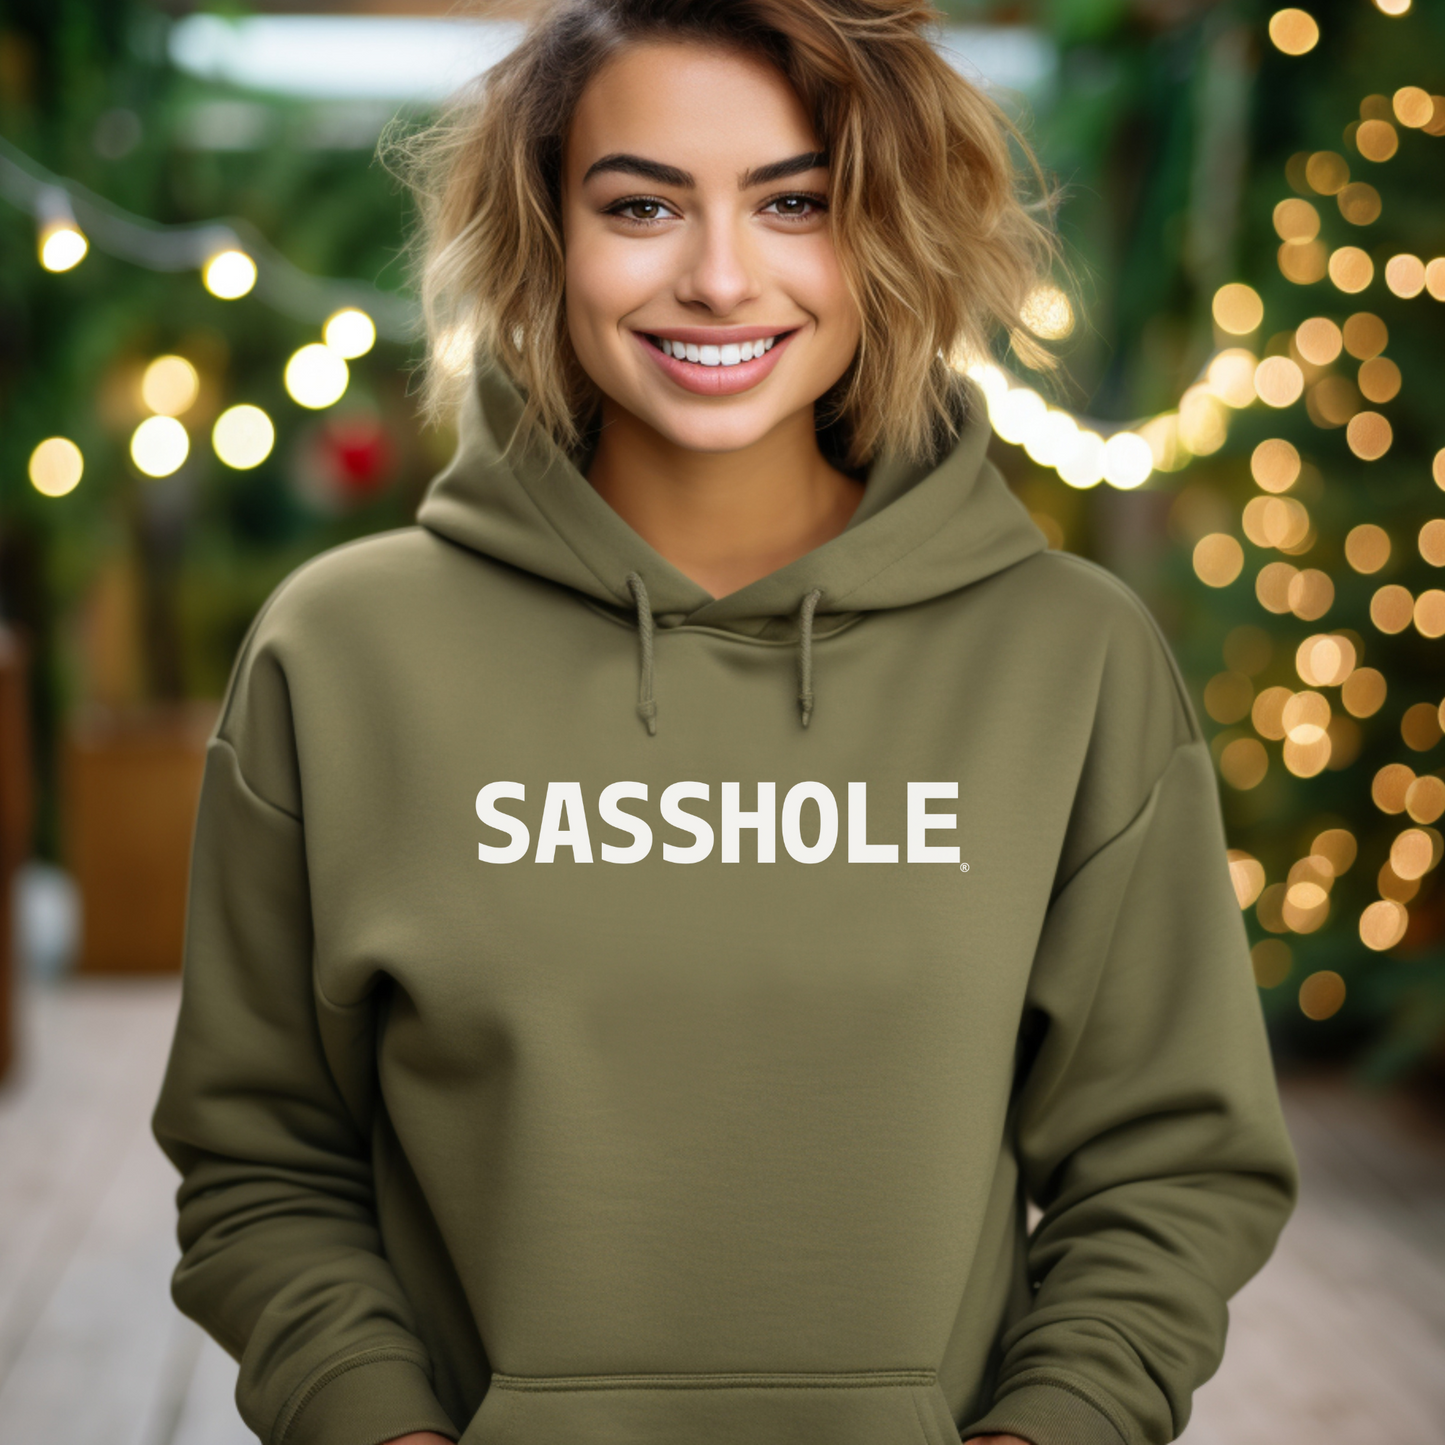 Wowomens pullover hoodie, womens oversized pullover hoodie, womens hoodies, womens hoodie, womens graphic pullover hoodies, womens fleece pullover hoodies, womens black hoodie pullover, womens black hoodie, women's pullover hoodies, women's pullover, women's hoods, women's hooded sweatshirts, women's hooded sweatshirt, Women's Clothing, women's casual wear, women's black graphic hoodie, women hoodies, women hoodie, witty wardrobe, witty slogan hoodie